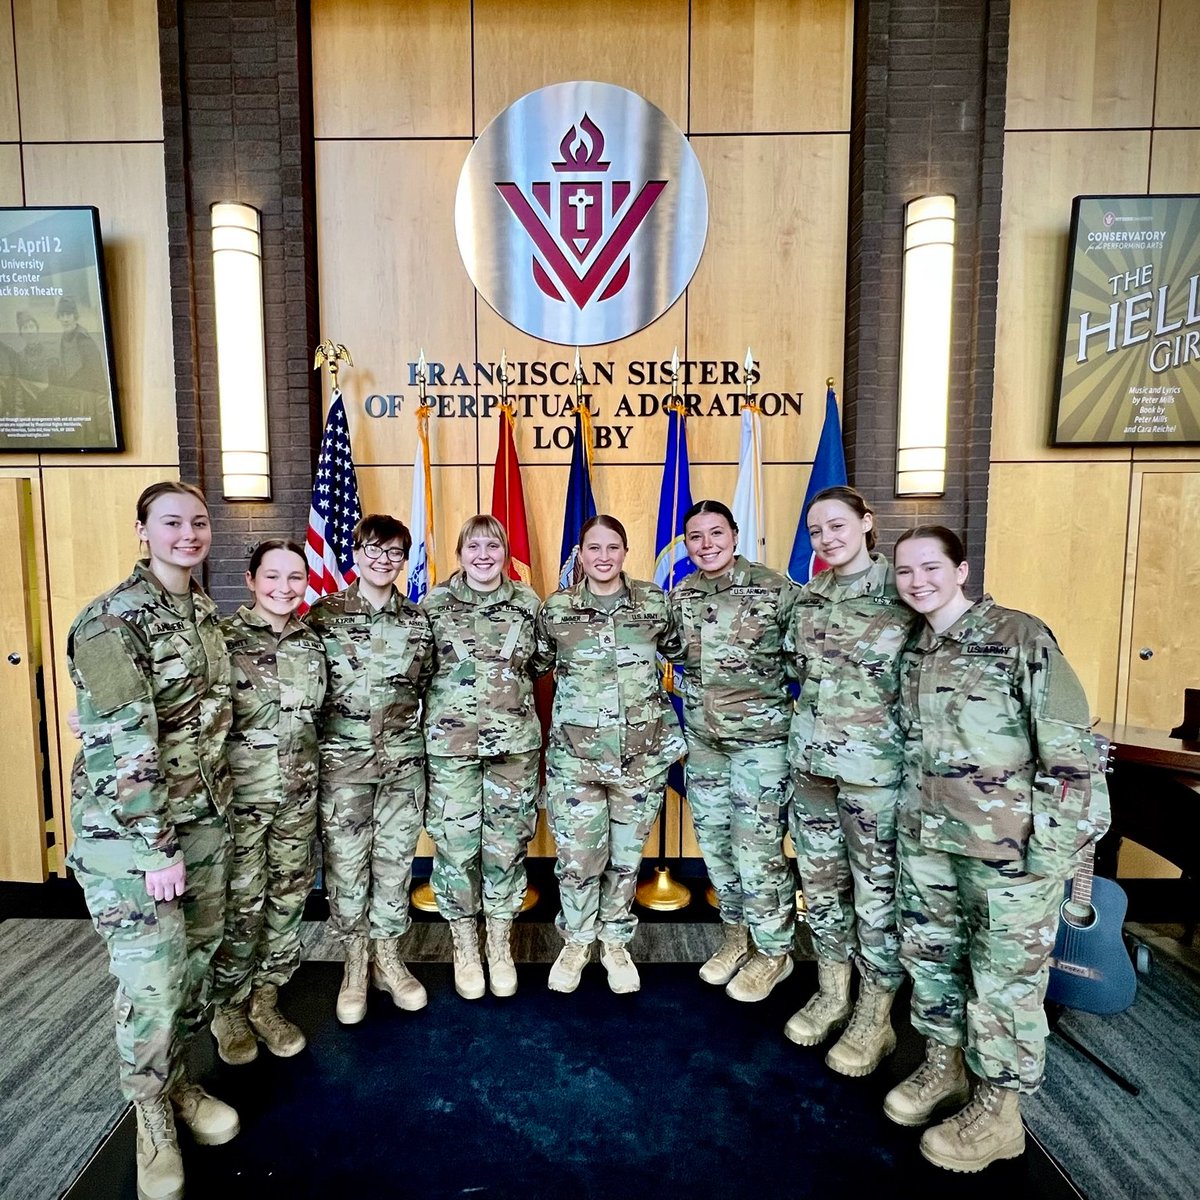 Yesterday, Viterbo University hosted a Women's Military History event where Lt. Col. Mindy Mingerink and Command Sgt. Maj. Terri Vollrath, the only female maneuver command team in the #WisconsinNationalGuard provided remarks. #WomensHistoryMonth